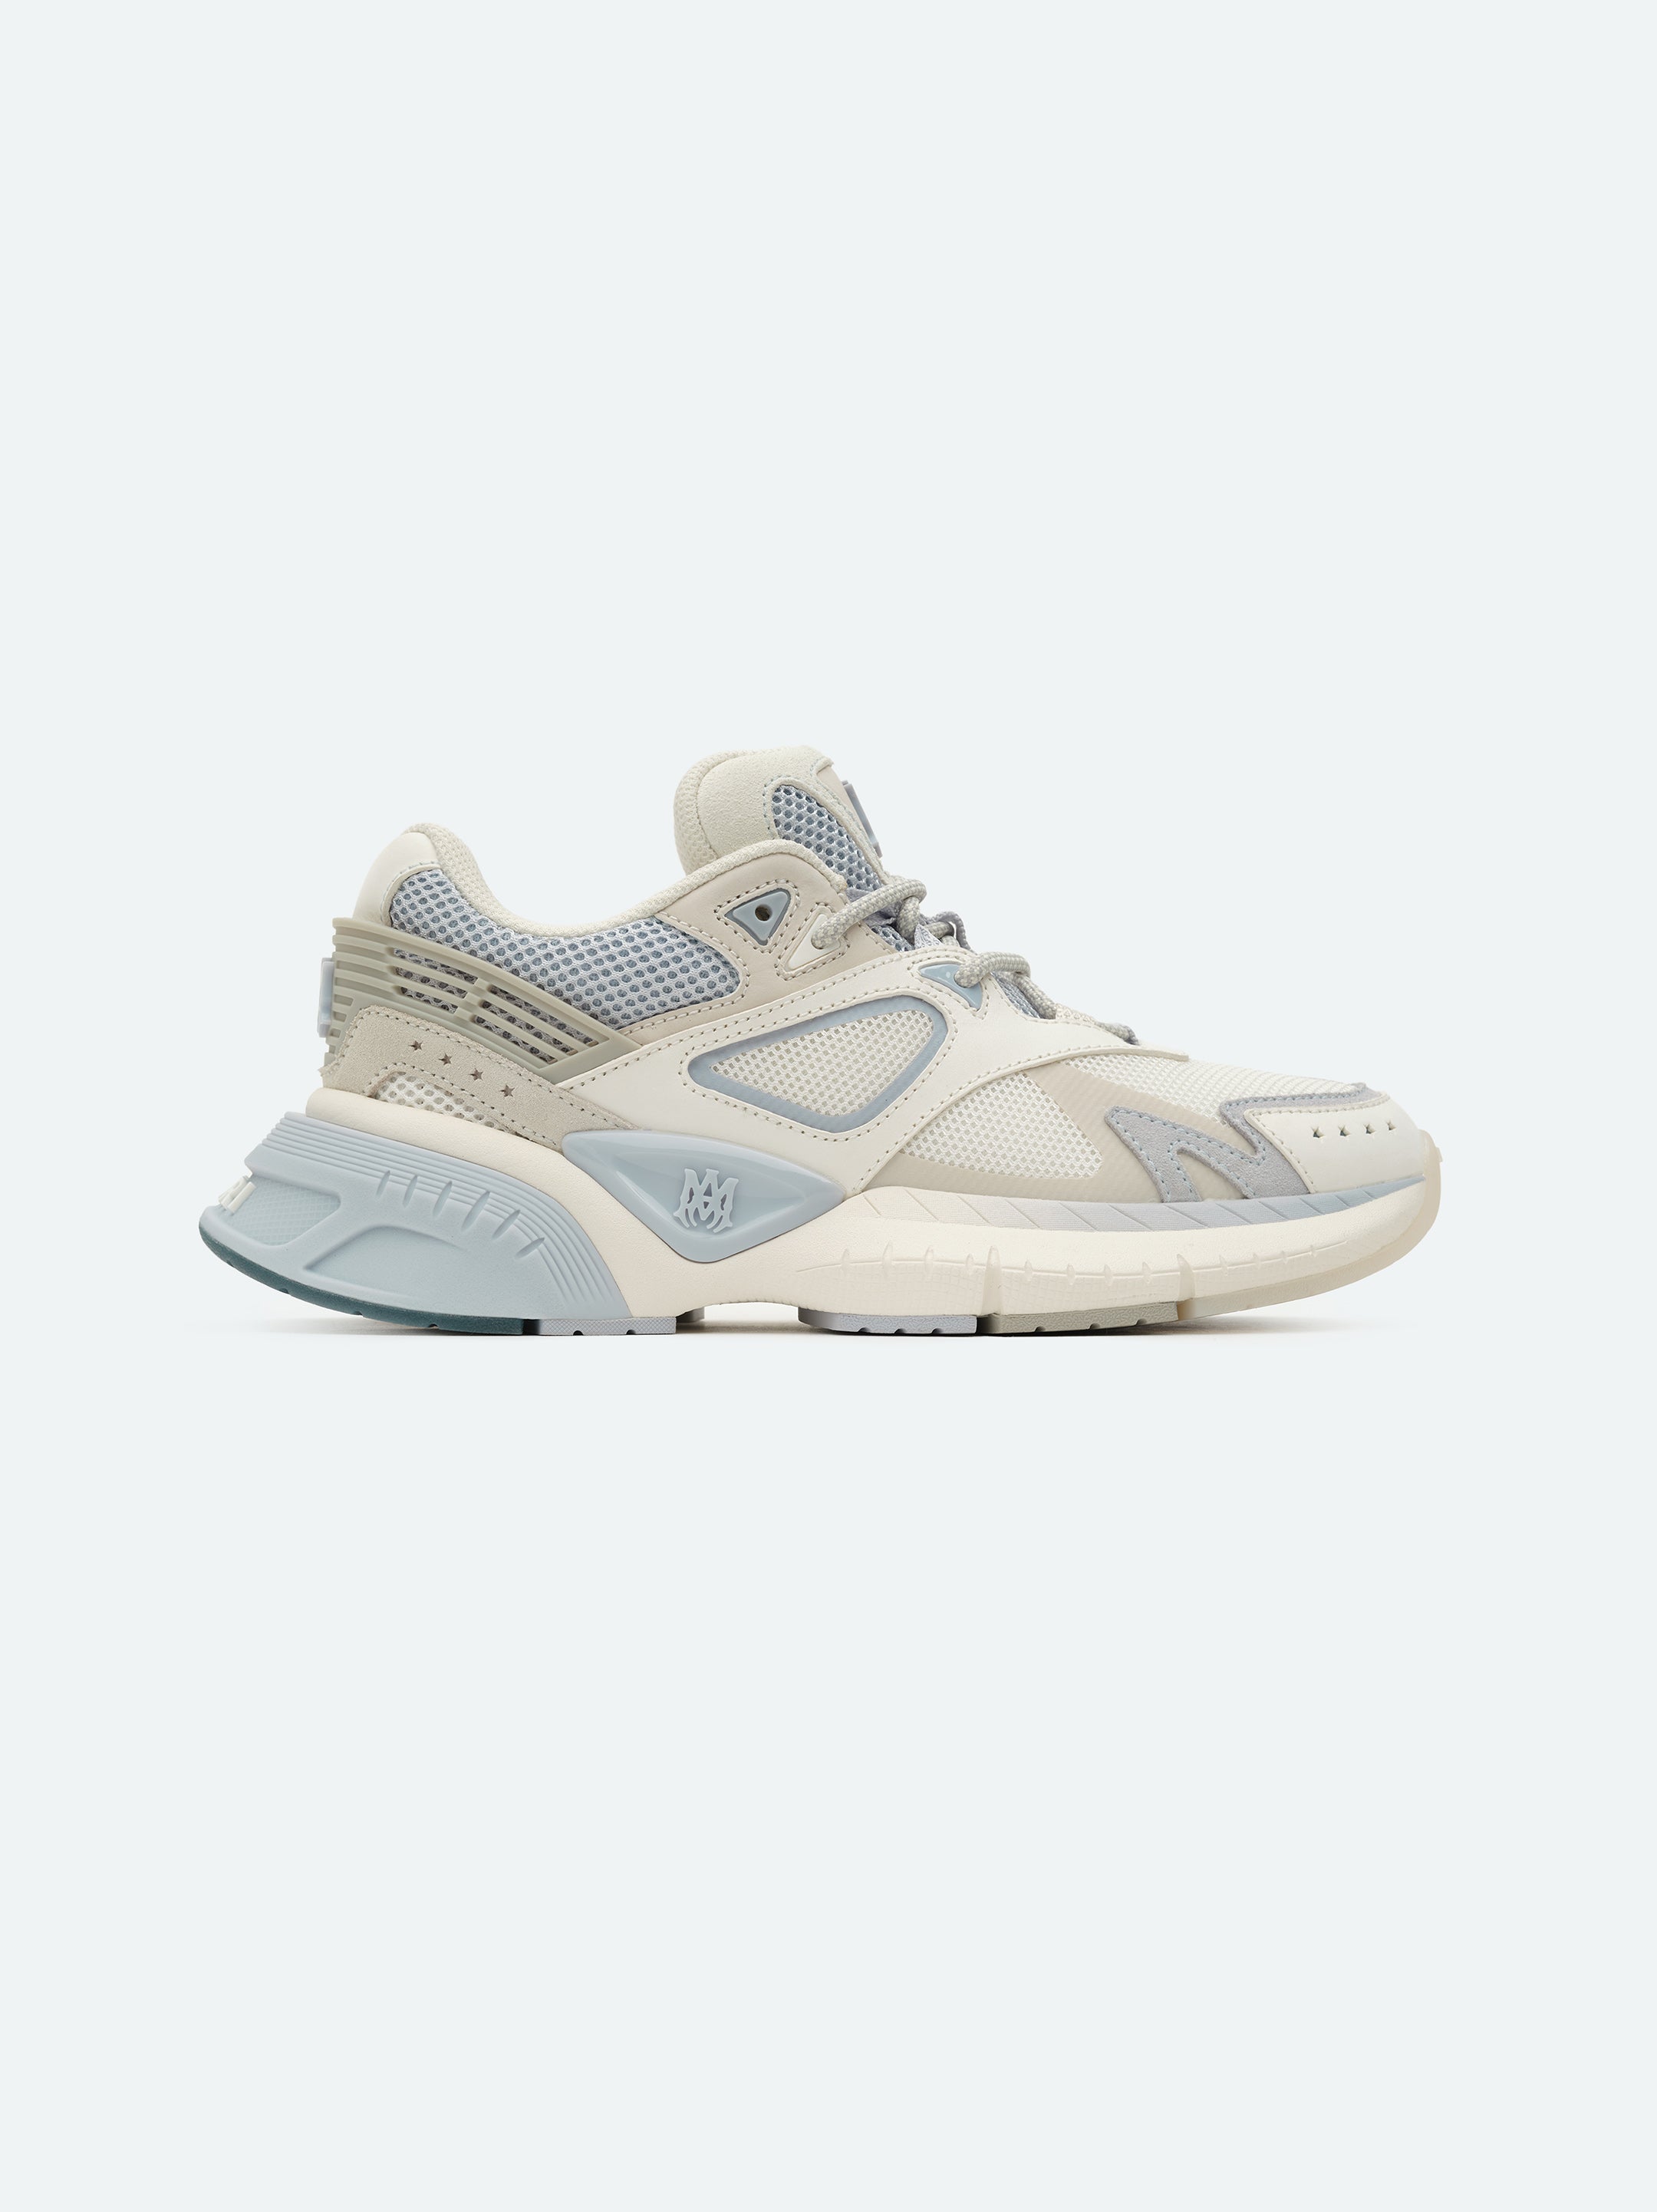 Product WOMEN - MA RUNNER - Grey Blue featured image